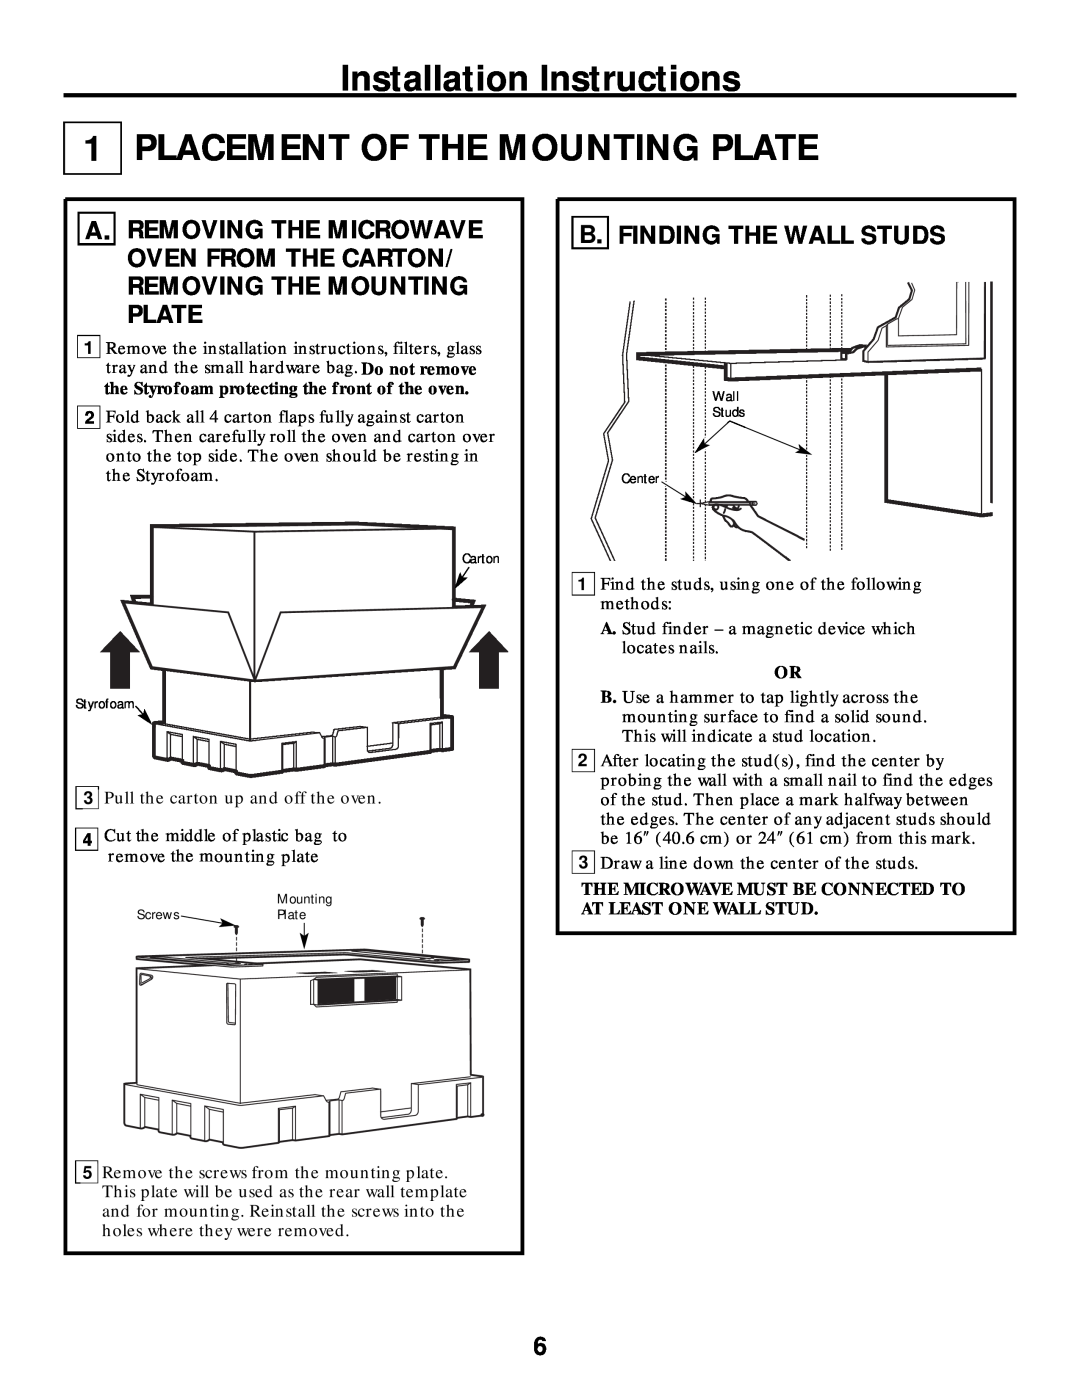 Frigidaire 316495063 warranty Installation Instructions 1 PLACEMENT OF THE MOUNTING PLATE, B. Finding The Wall Studs 